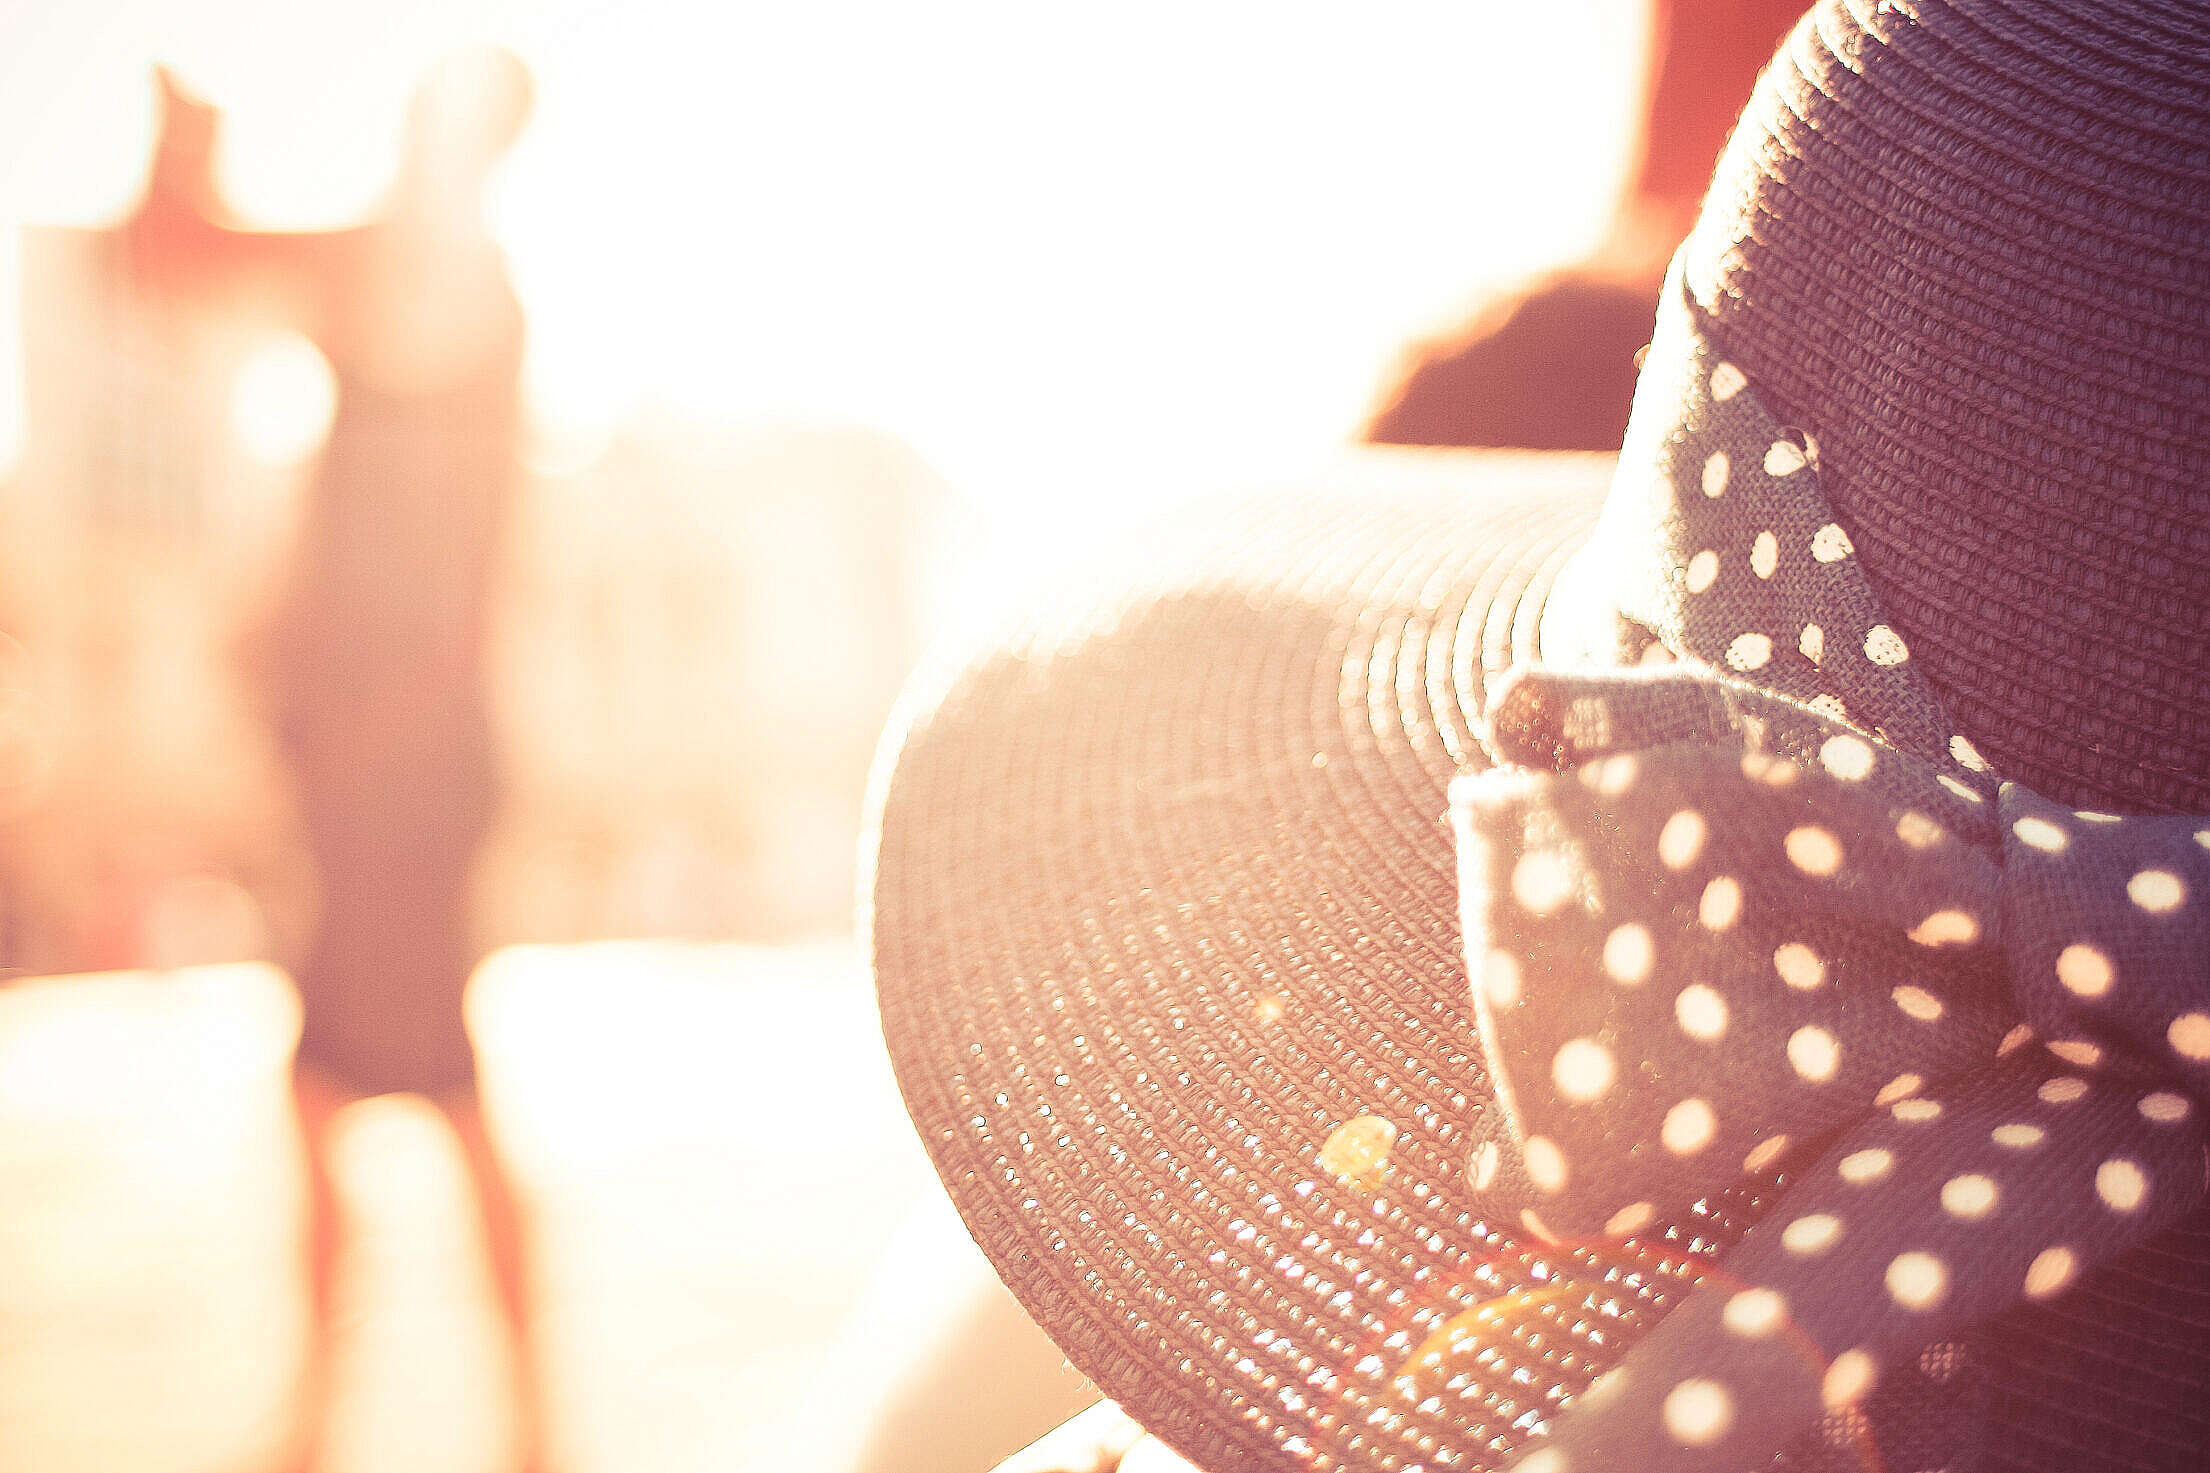 Another Girl Hat in Sunlights Free Stock Photo